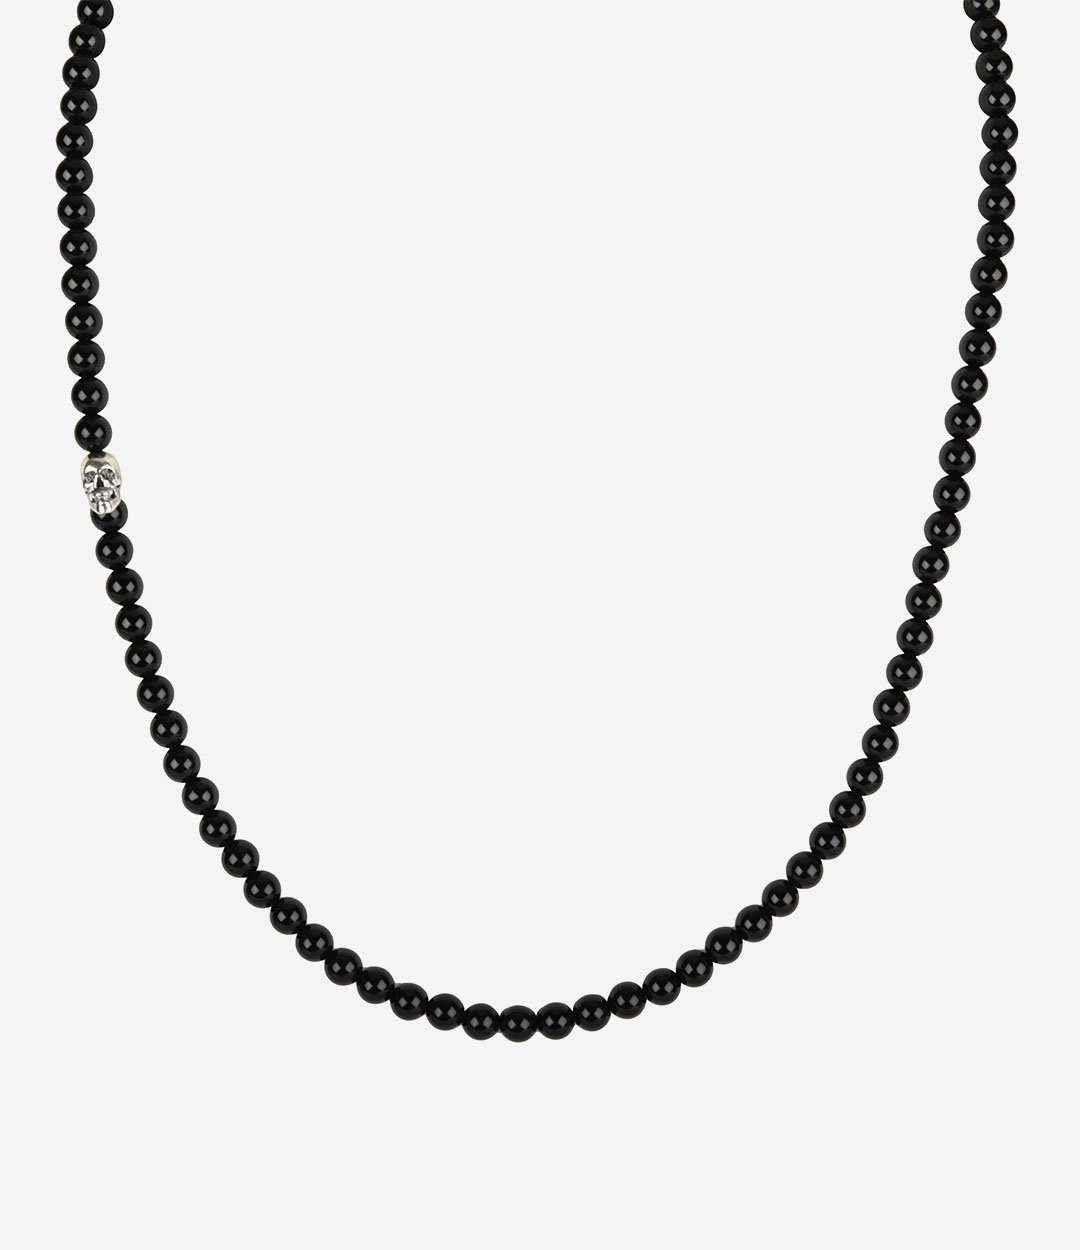 Degs & Sal Sterling Silver Black Onyx Beaded Necklace